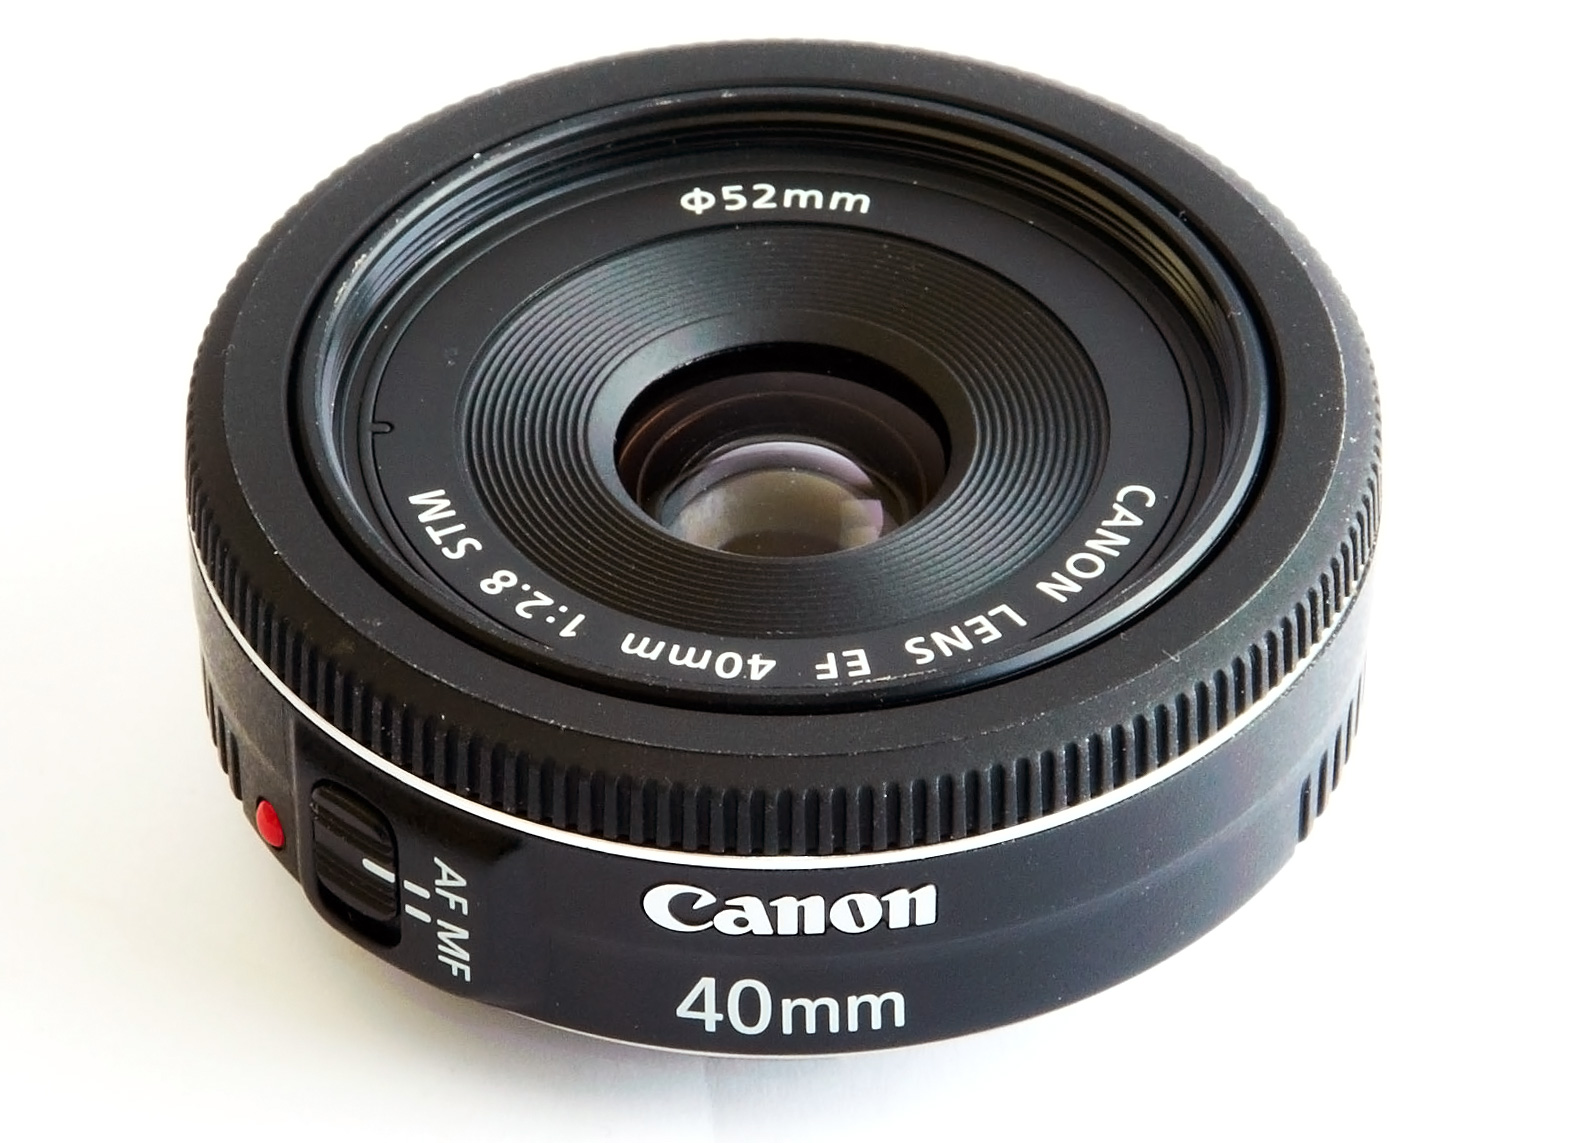 Объективы 40mm. Canon 40mm 2.8 STM. 40мм Canon f2.8 STM. Canon 40mm f/2.8. Canon EF 40mm Lens.